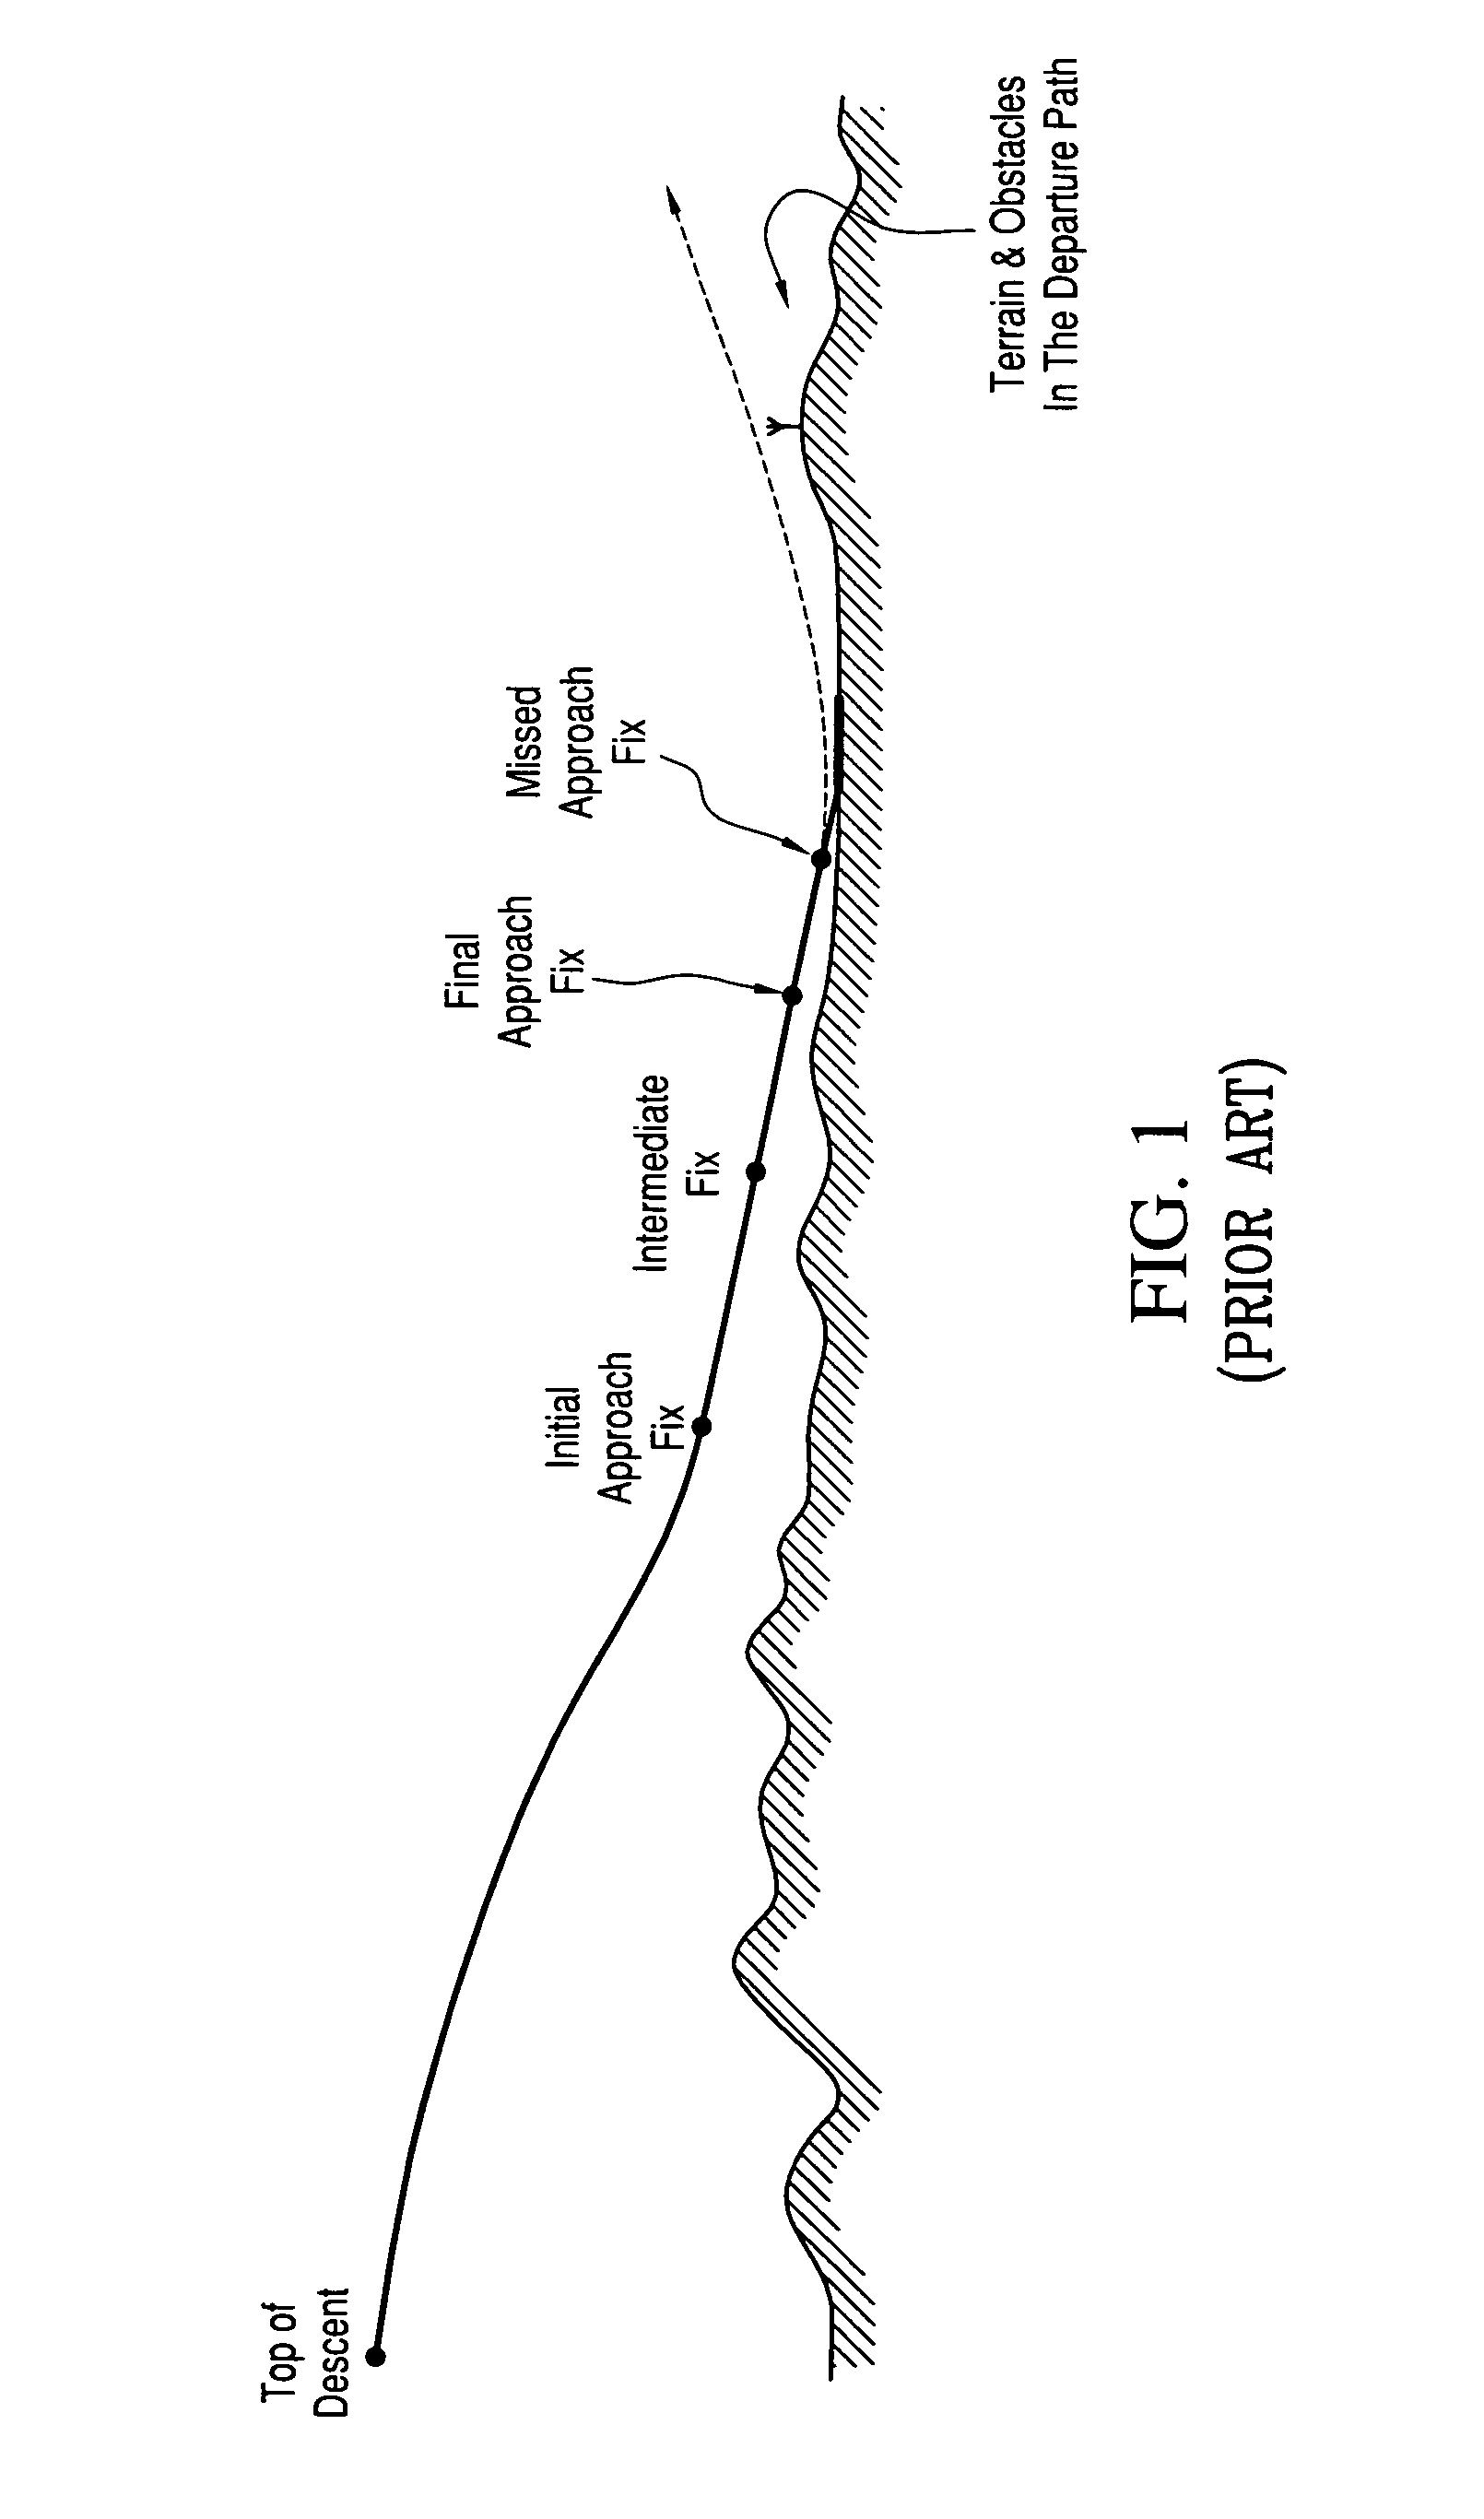 Method and system for the cursor-aided manipulation of flight plans in two and three dimensional displays